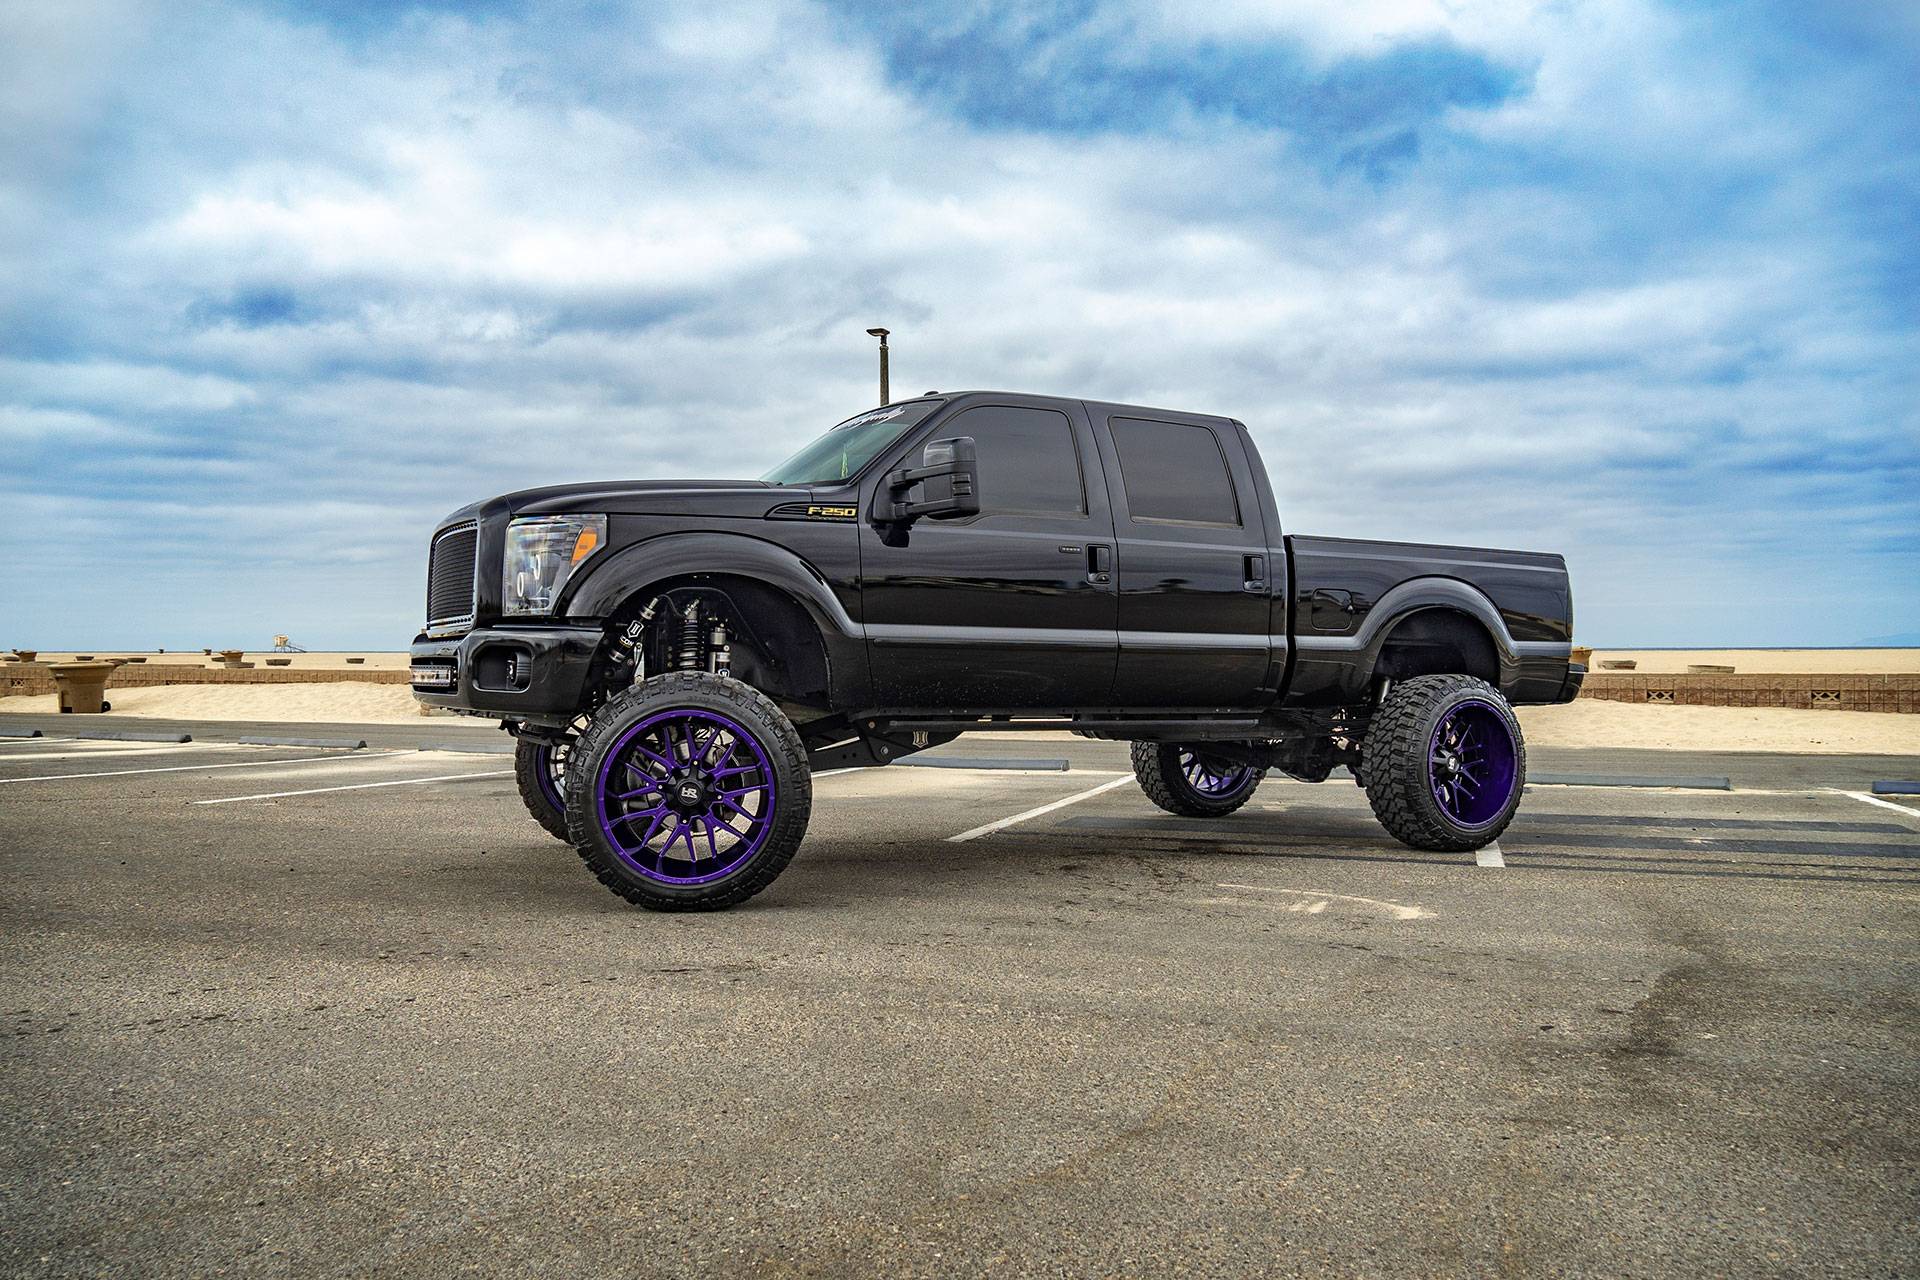 HardRock Offroad Aftermarket Offroad Wheels On A Ford F250